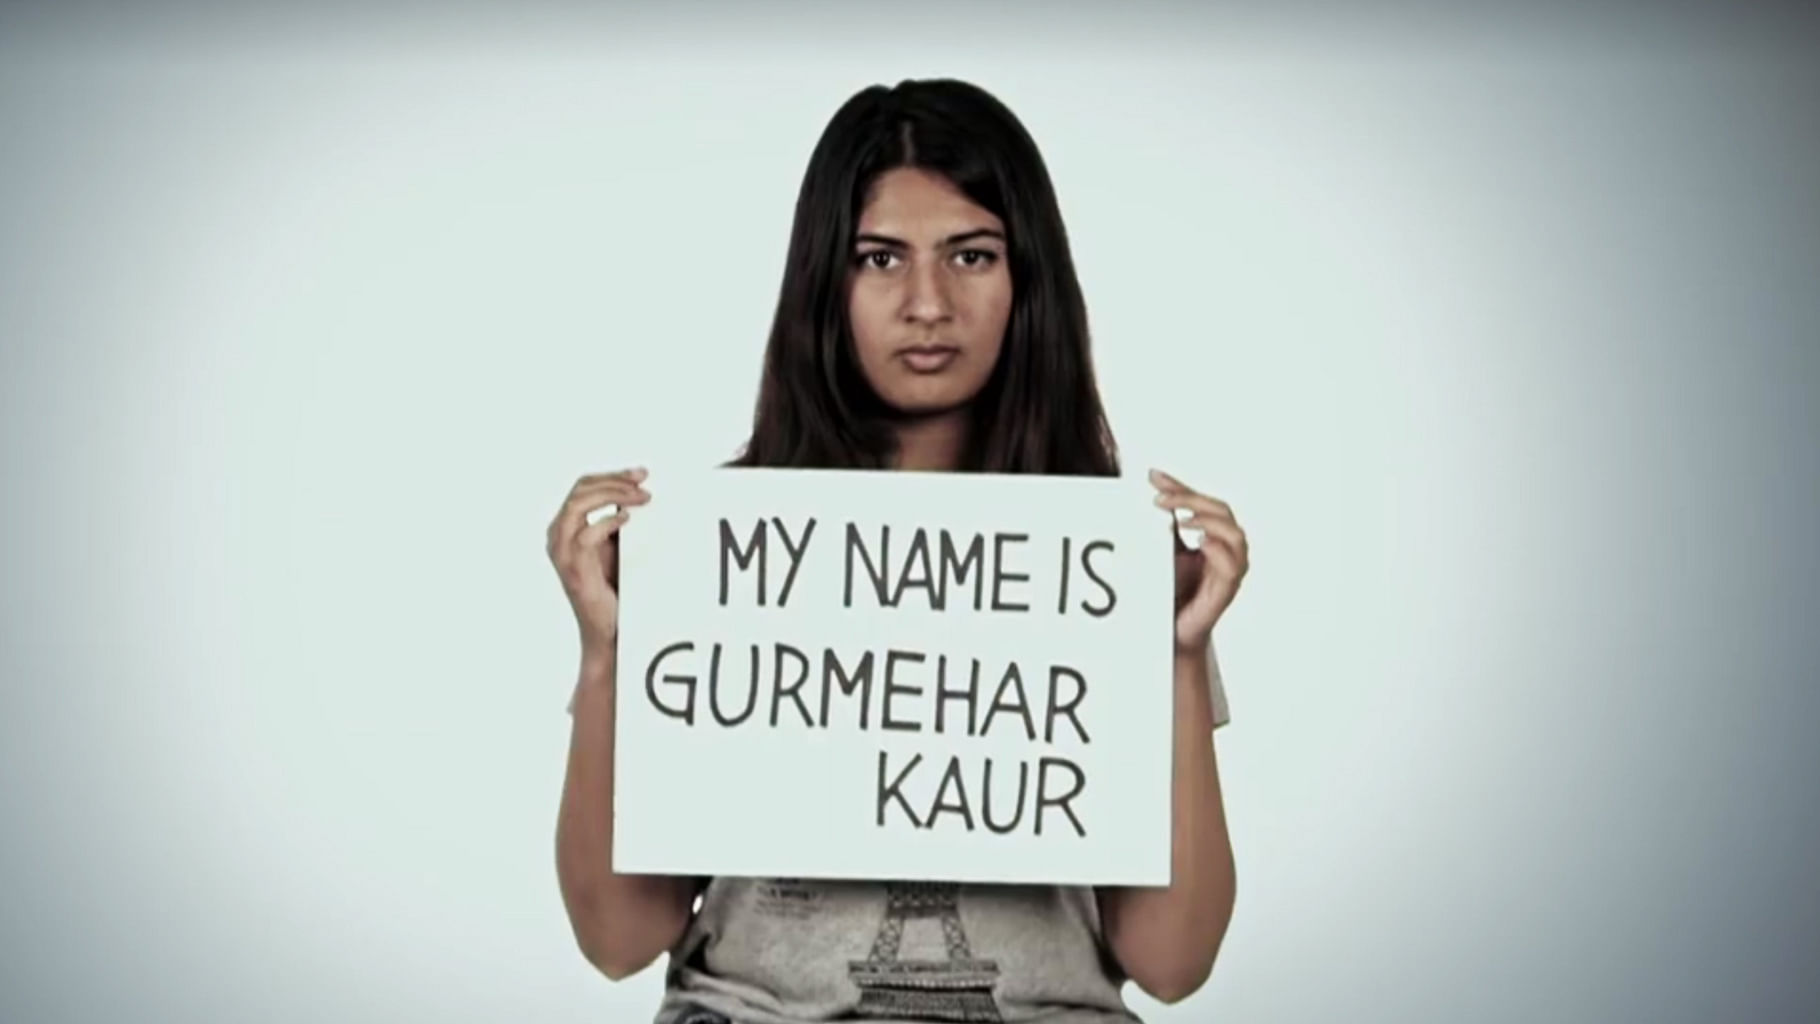 Gurmehar lost her father in the 1999 Kargil War at the age of 2. (Photo Courtesy: video screengrab)